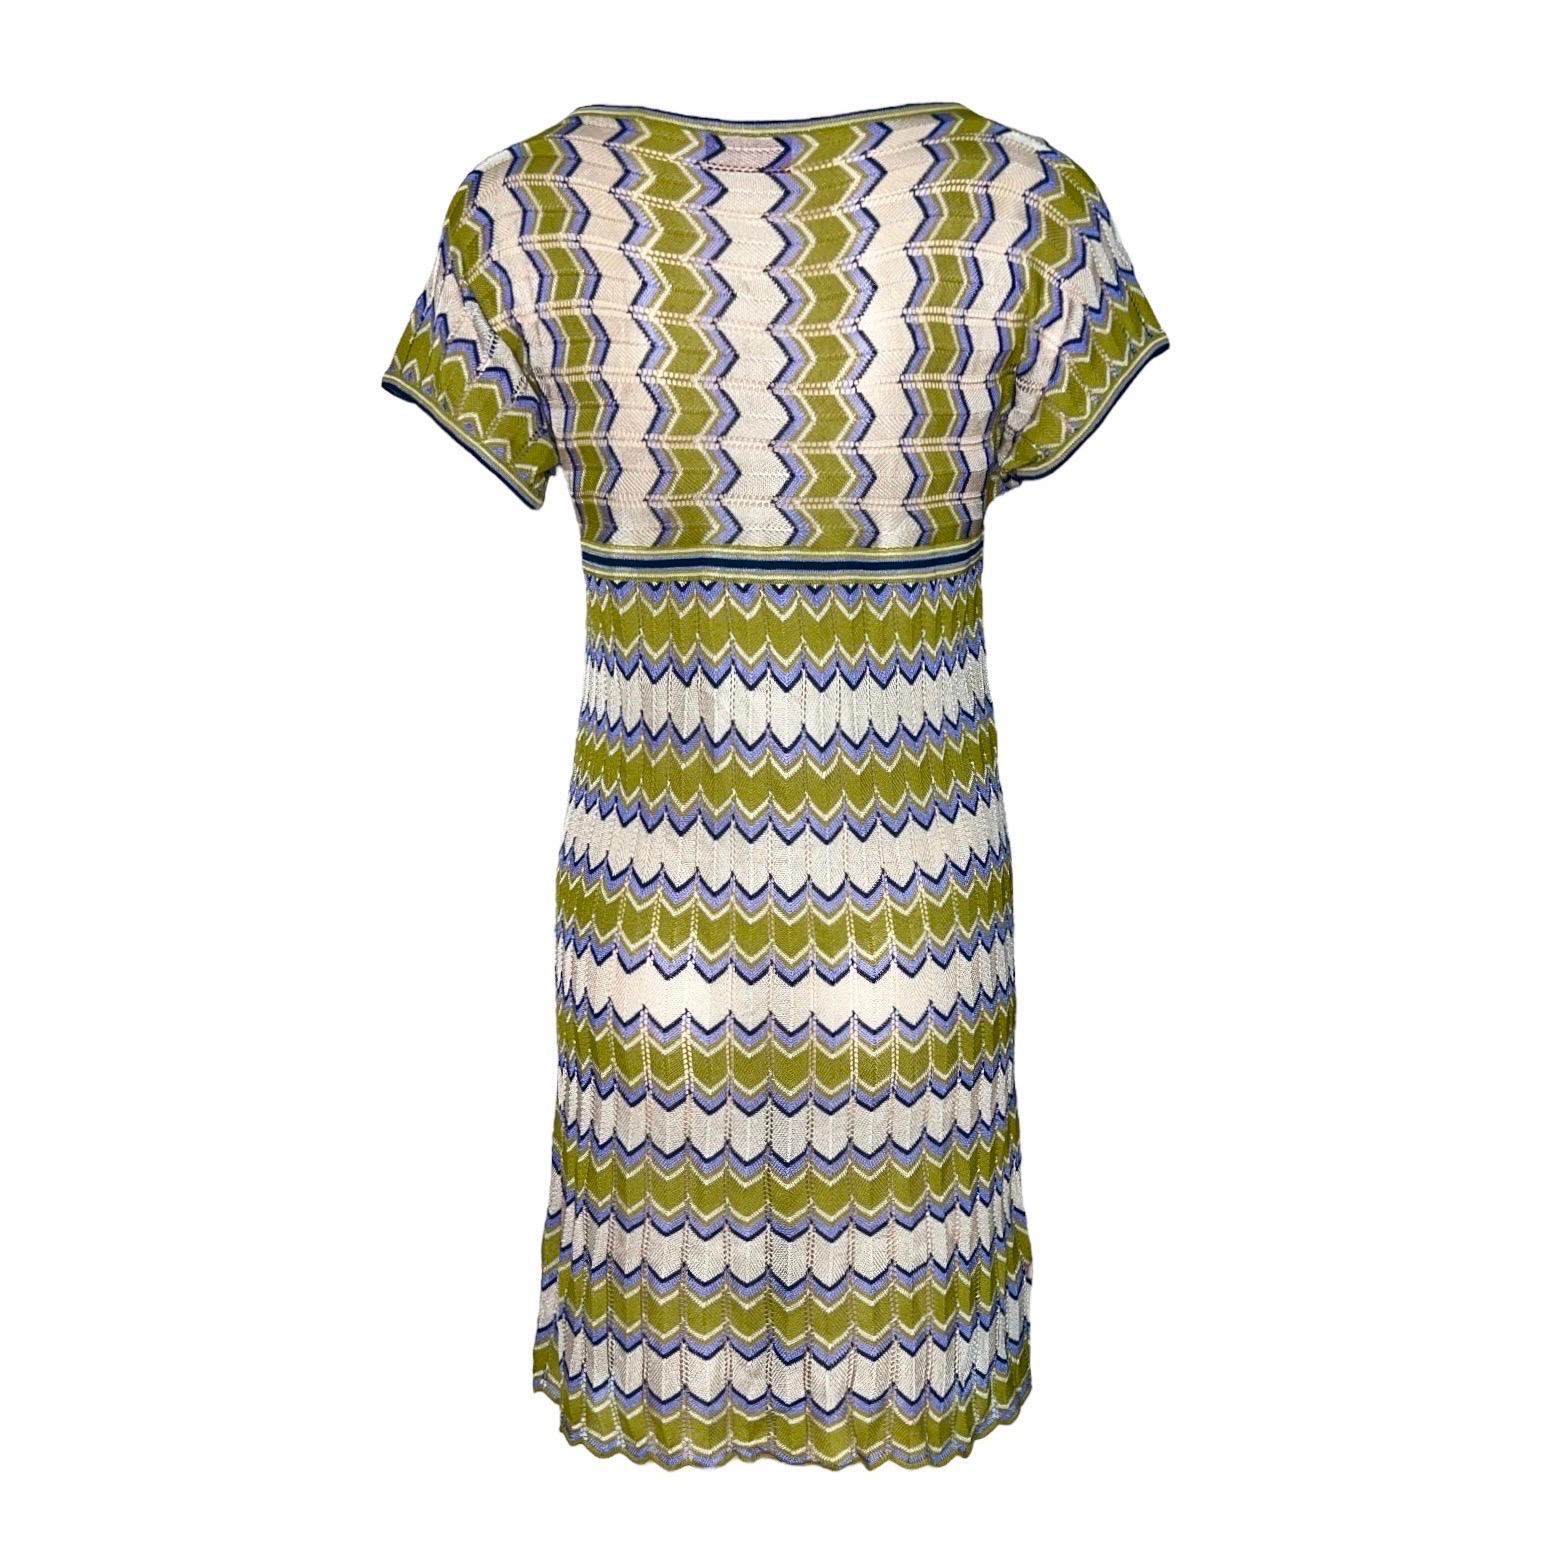 
Missoni's dress has been crafted in Italy using the label's signature crochet-knit technique. The easy-to-wear shape makes it perfect for a day in the city or to dress it up with heels for a night out.


Missoni signature crochet knit 
Simply slips